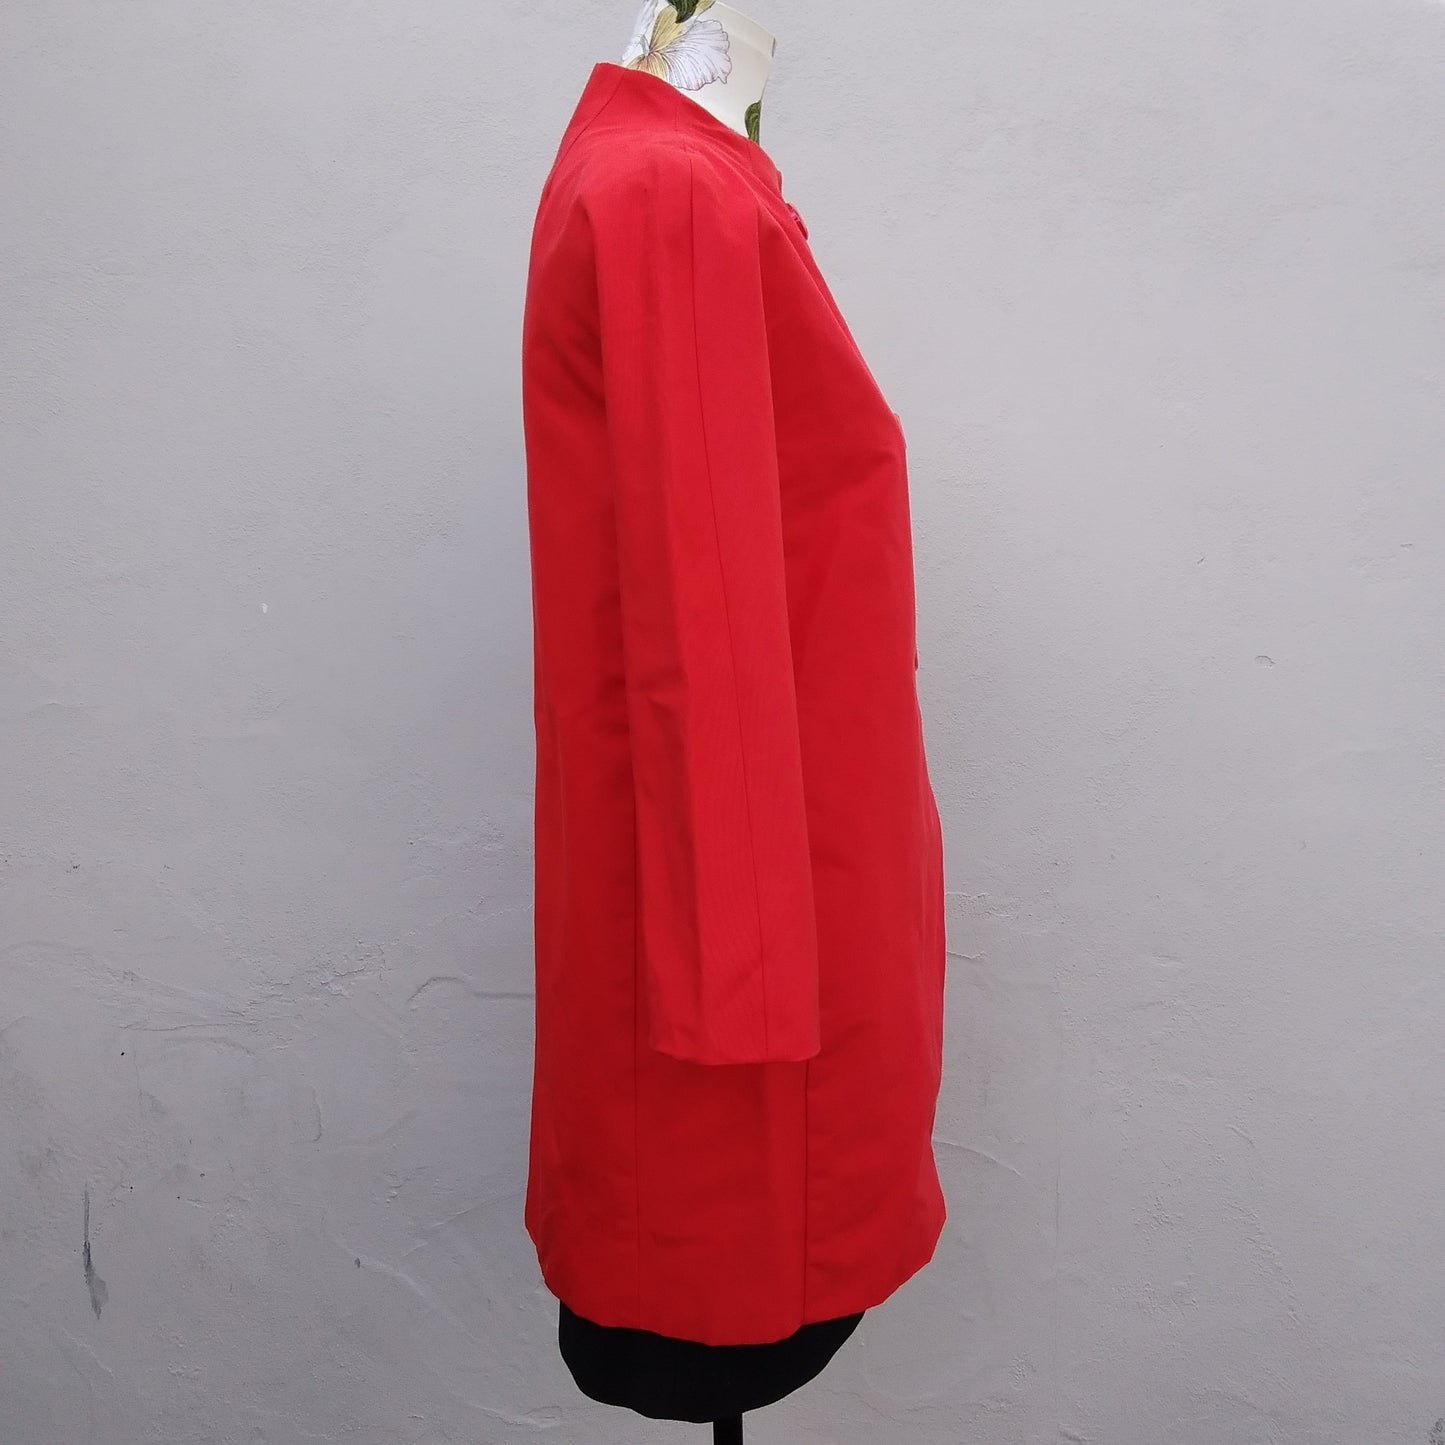 Kate Spade red Cotton Silk Blend Kendall Coat - S (missing bow)